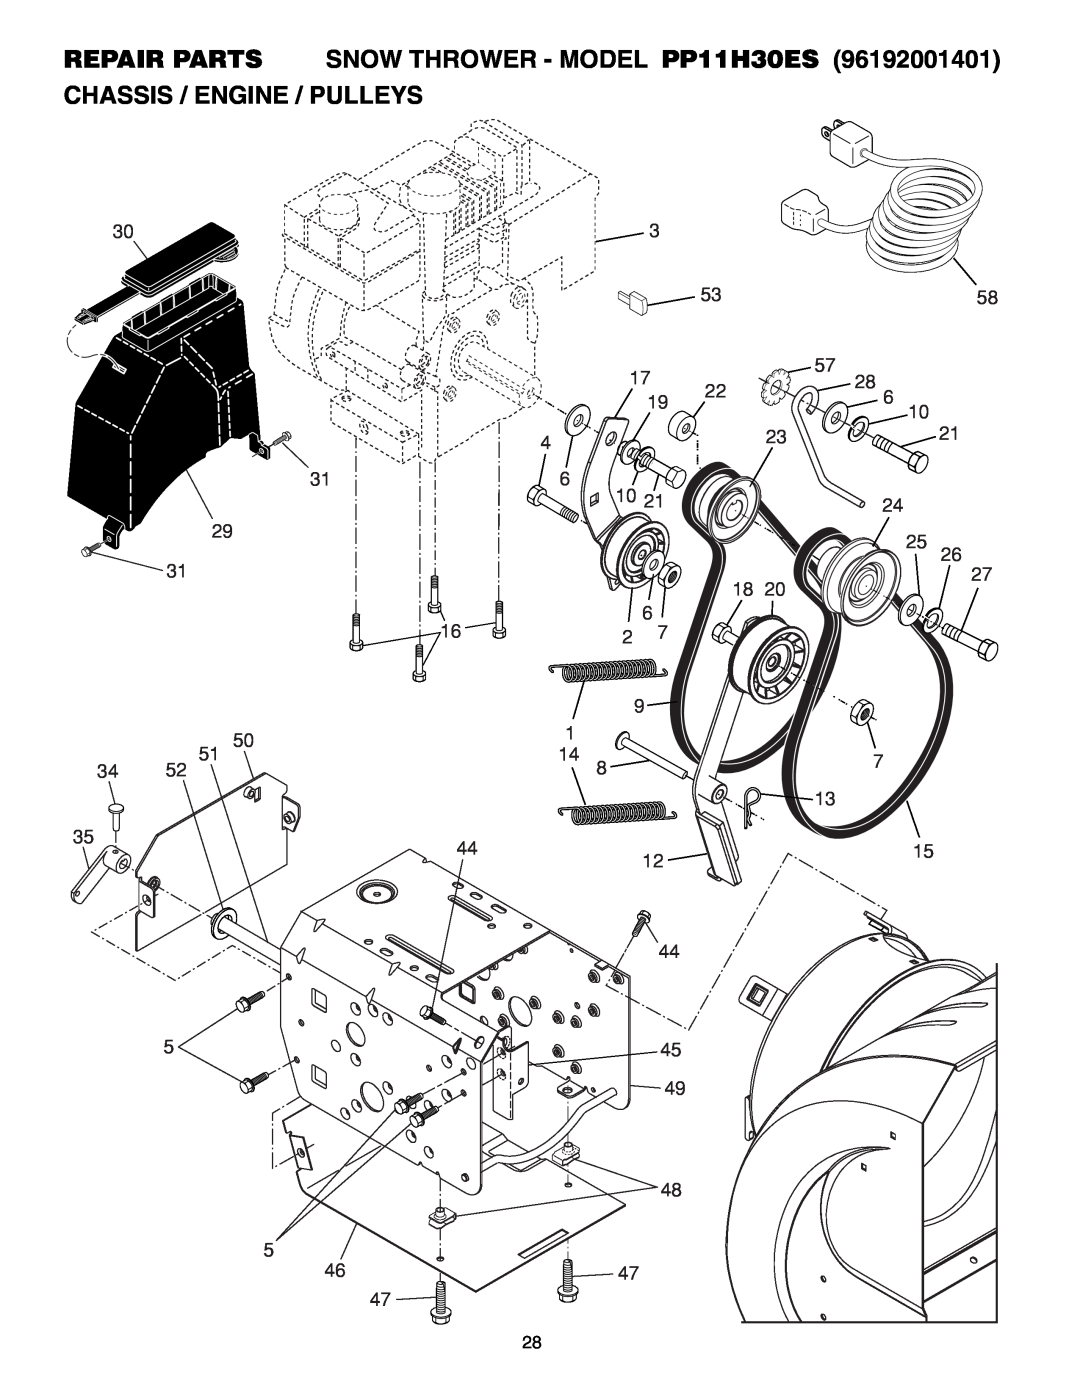 Poulan 96192001401, 408373 owner manual Chassis / Engine / Pulleys, REPAIR PARTS SNOW THROWER - MODEL PP11H30ES 